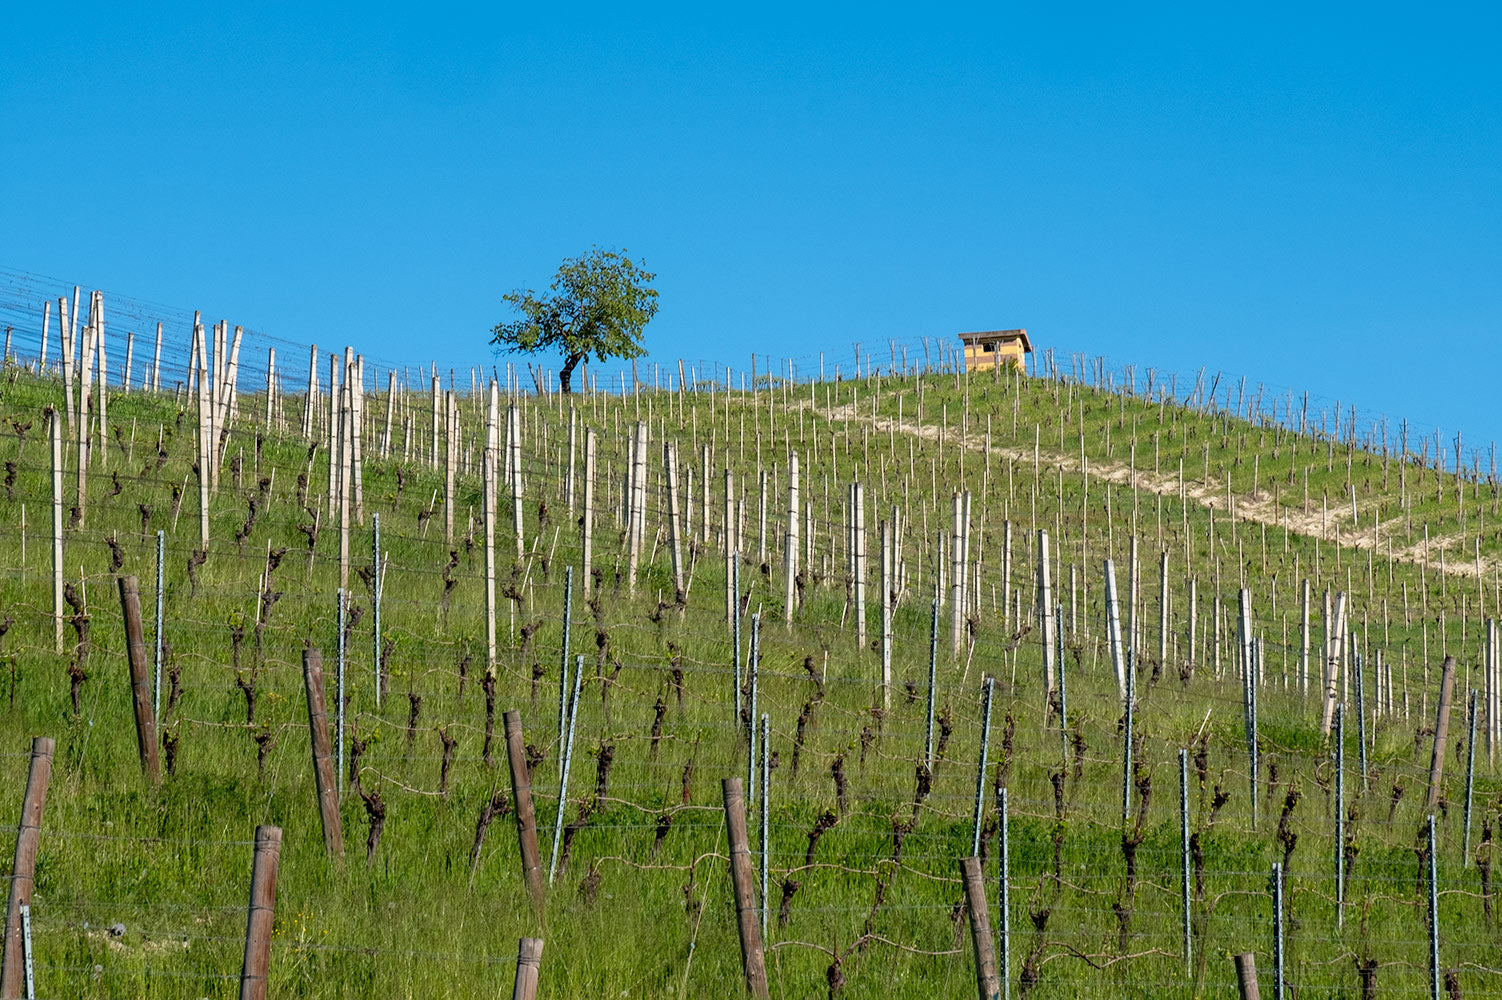 A hillside of young vines in Piedmont with a tree and a small house on the summit, below a clear blue sky.